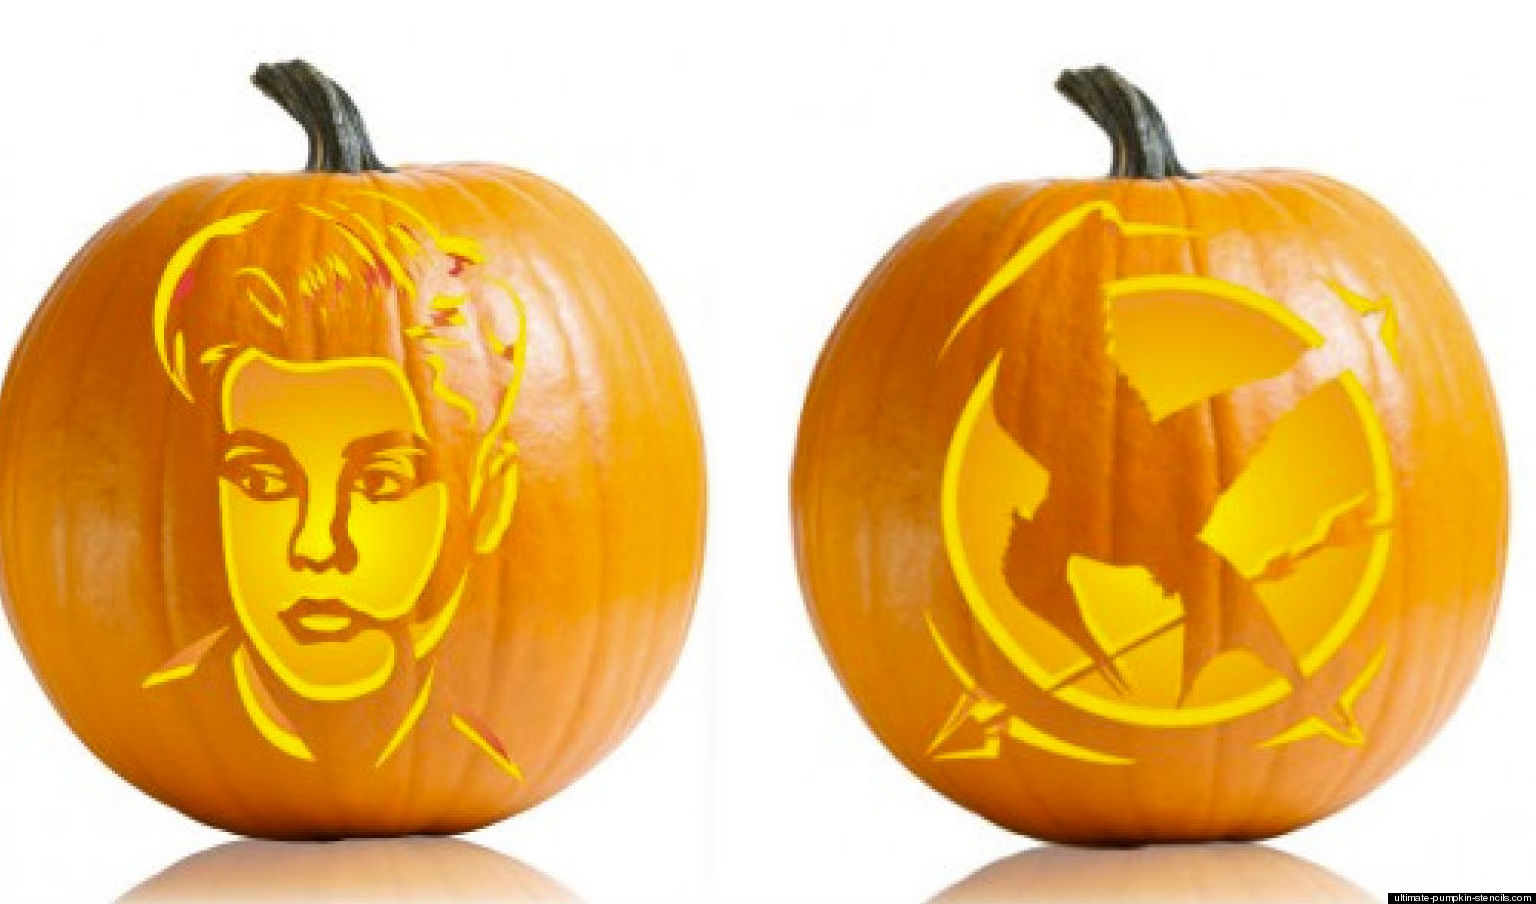 Pumpkin Carving Ideas 6 Awesome And Unusual Jack O Lantern Patterns 